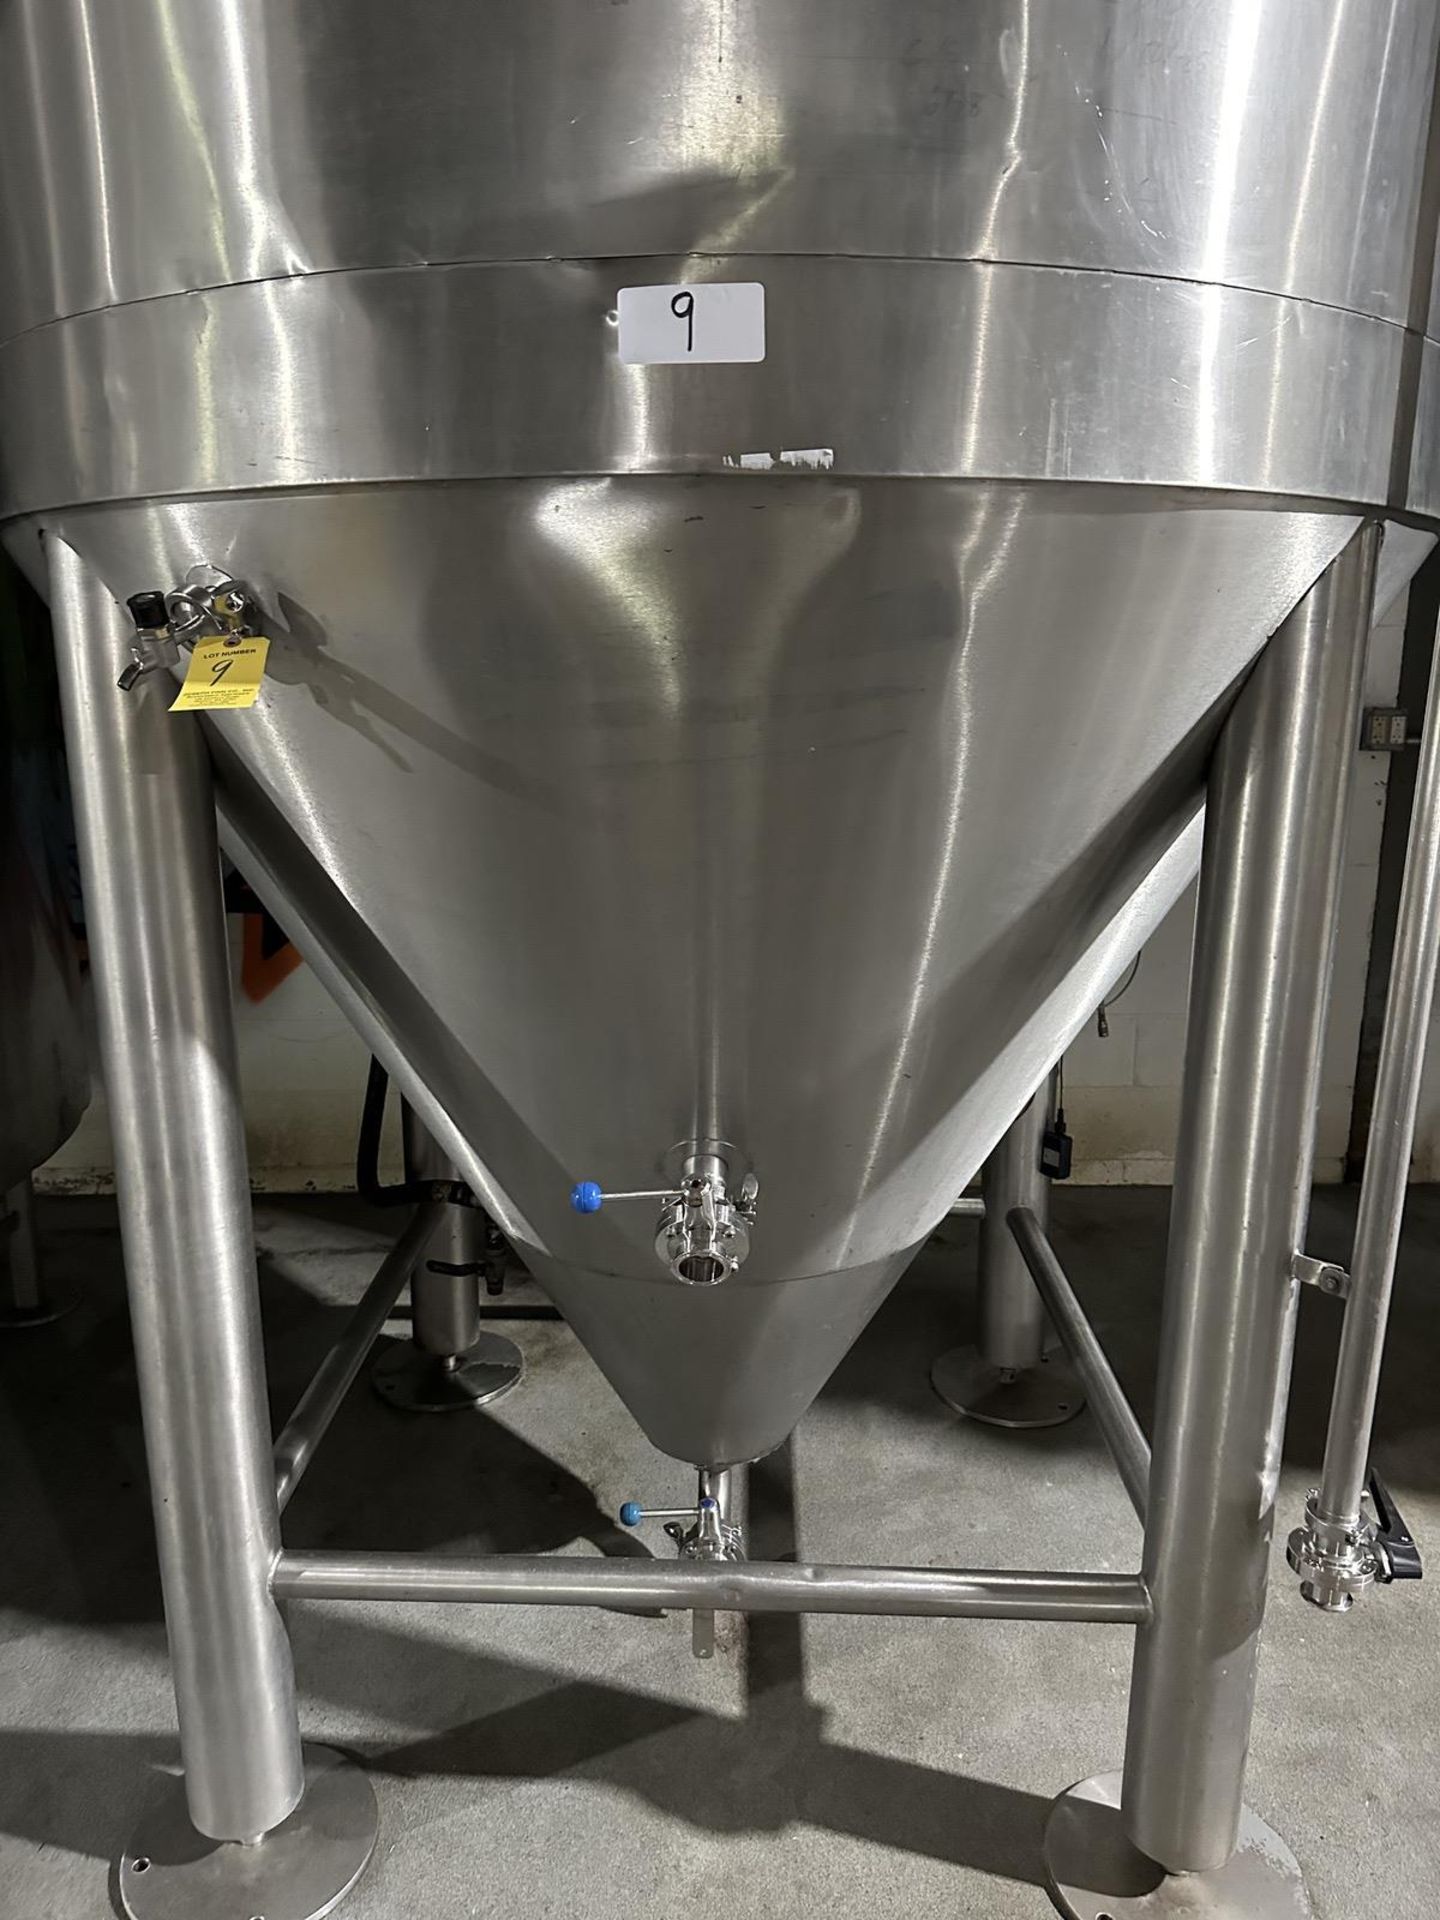 Approx. 30 BBL Stainless Steel Fermenter, Glycol Jacketed - Image 2 of 3